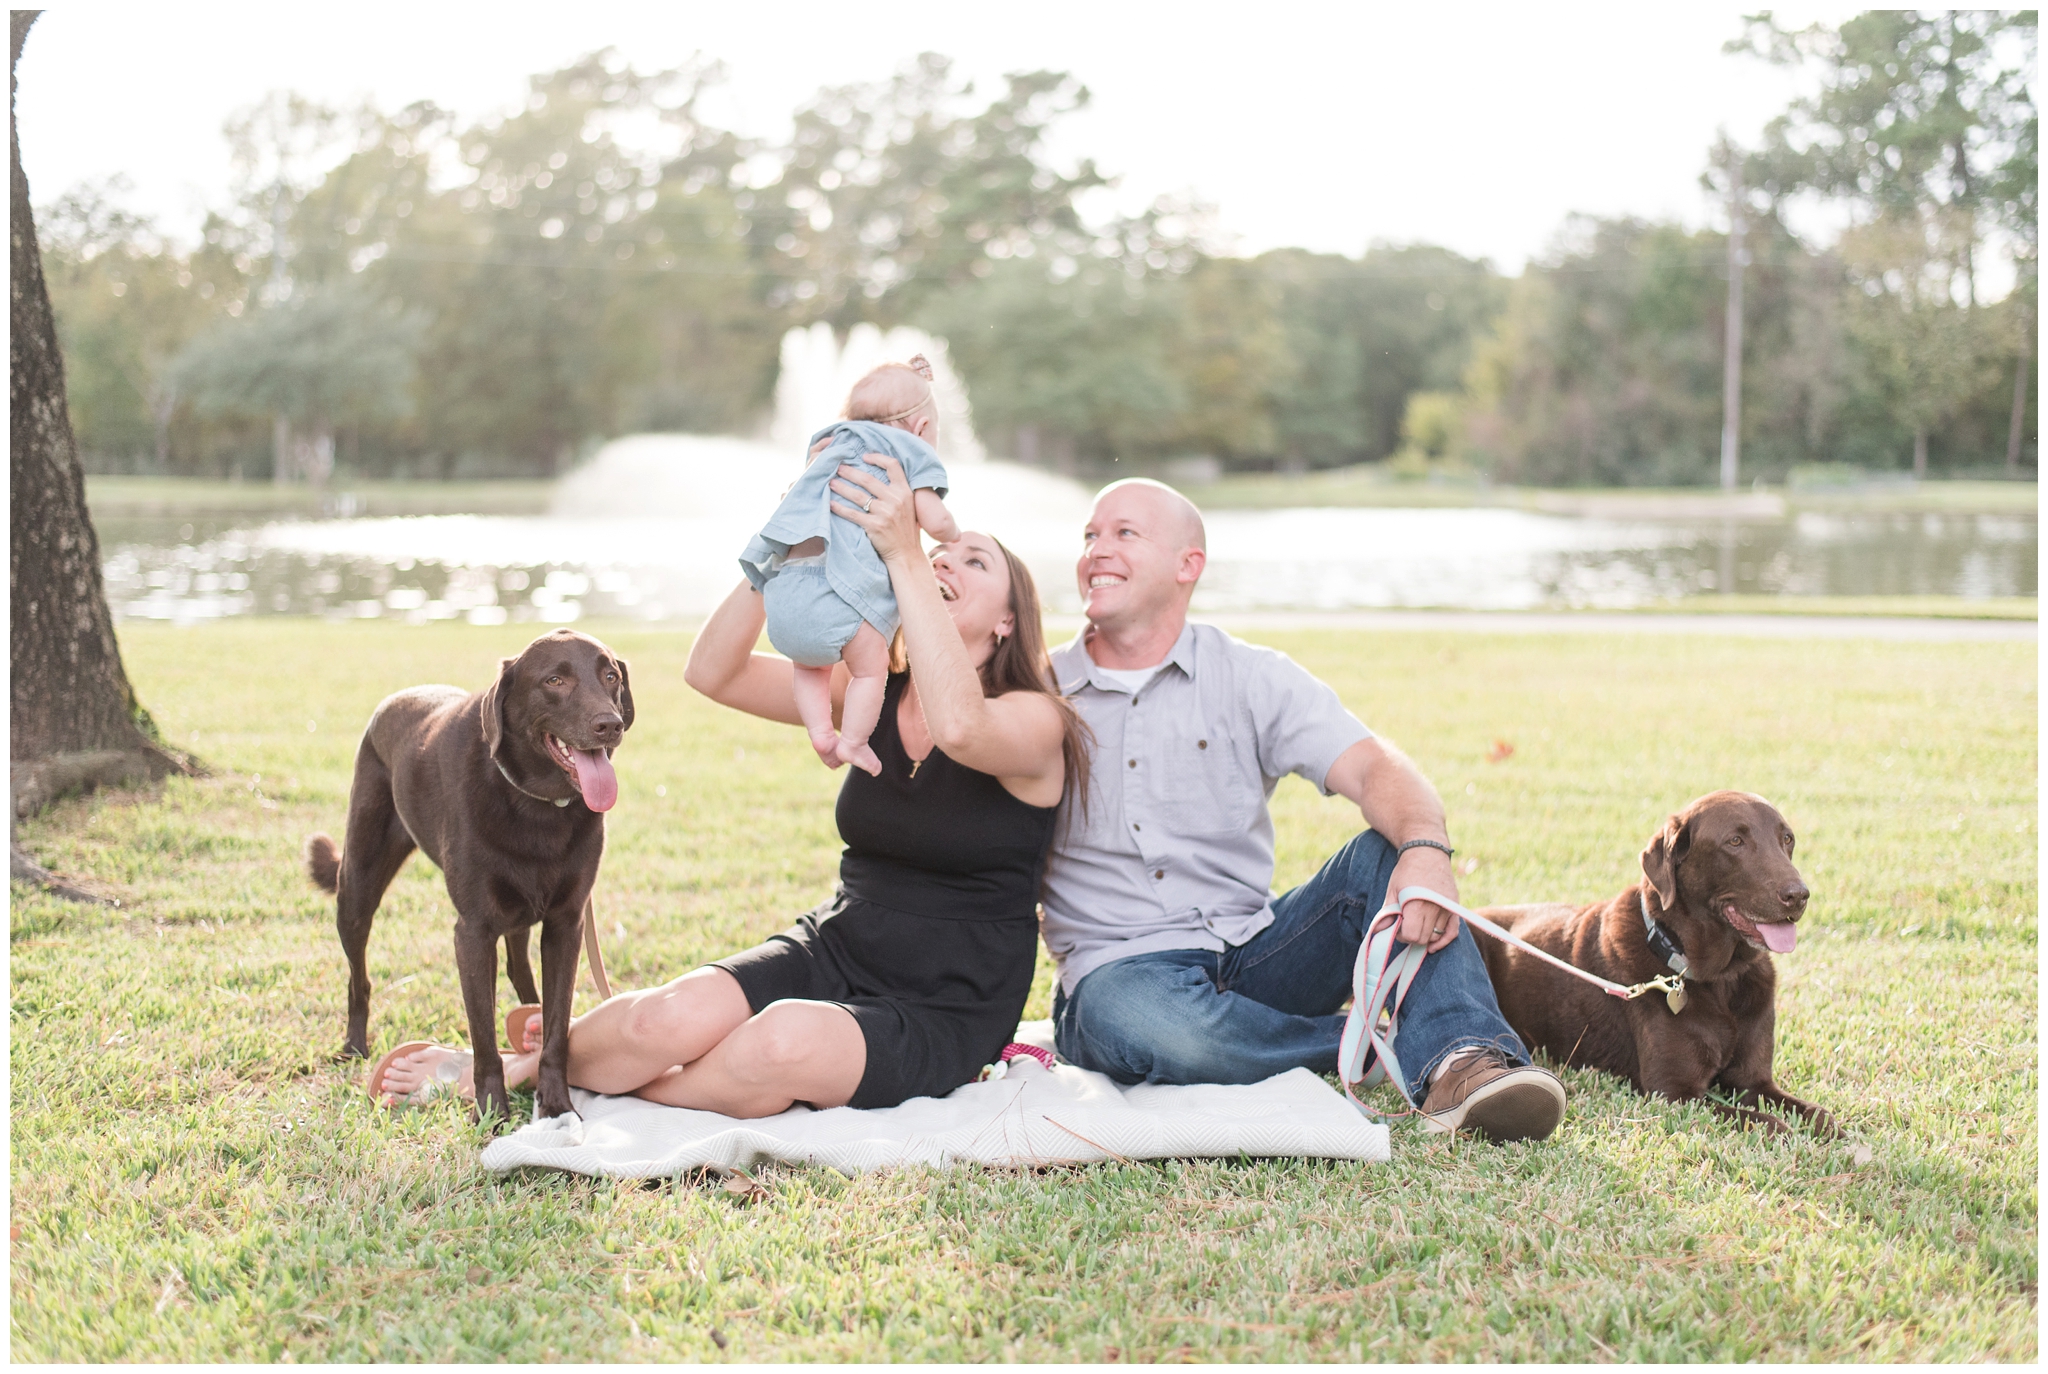 Kingwood photographer outdoor family portrait session with infant and two dogs